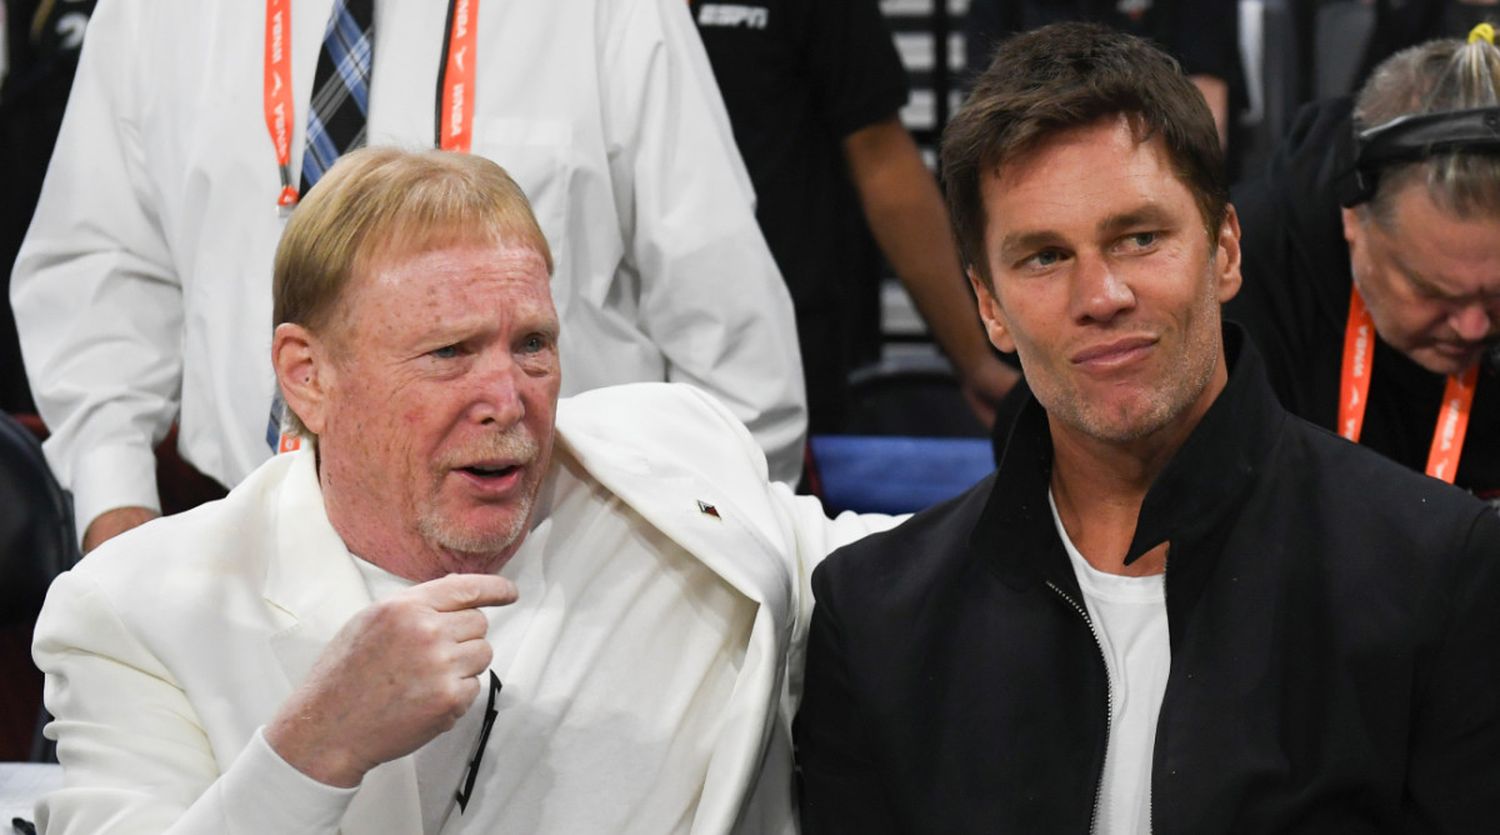 Tom Brady: From NFL Legend to Raiders' Owner?